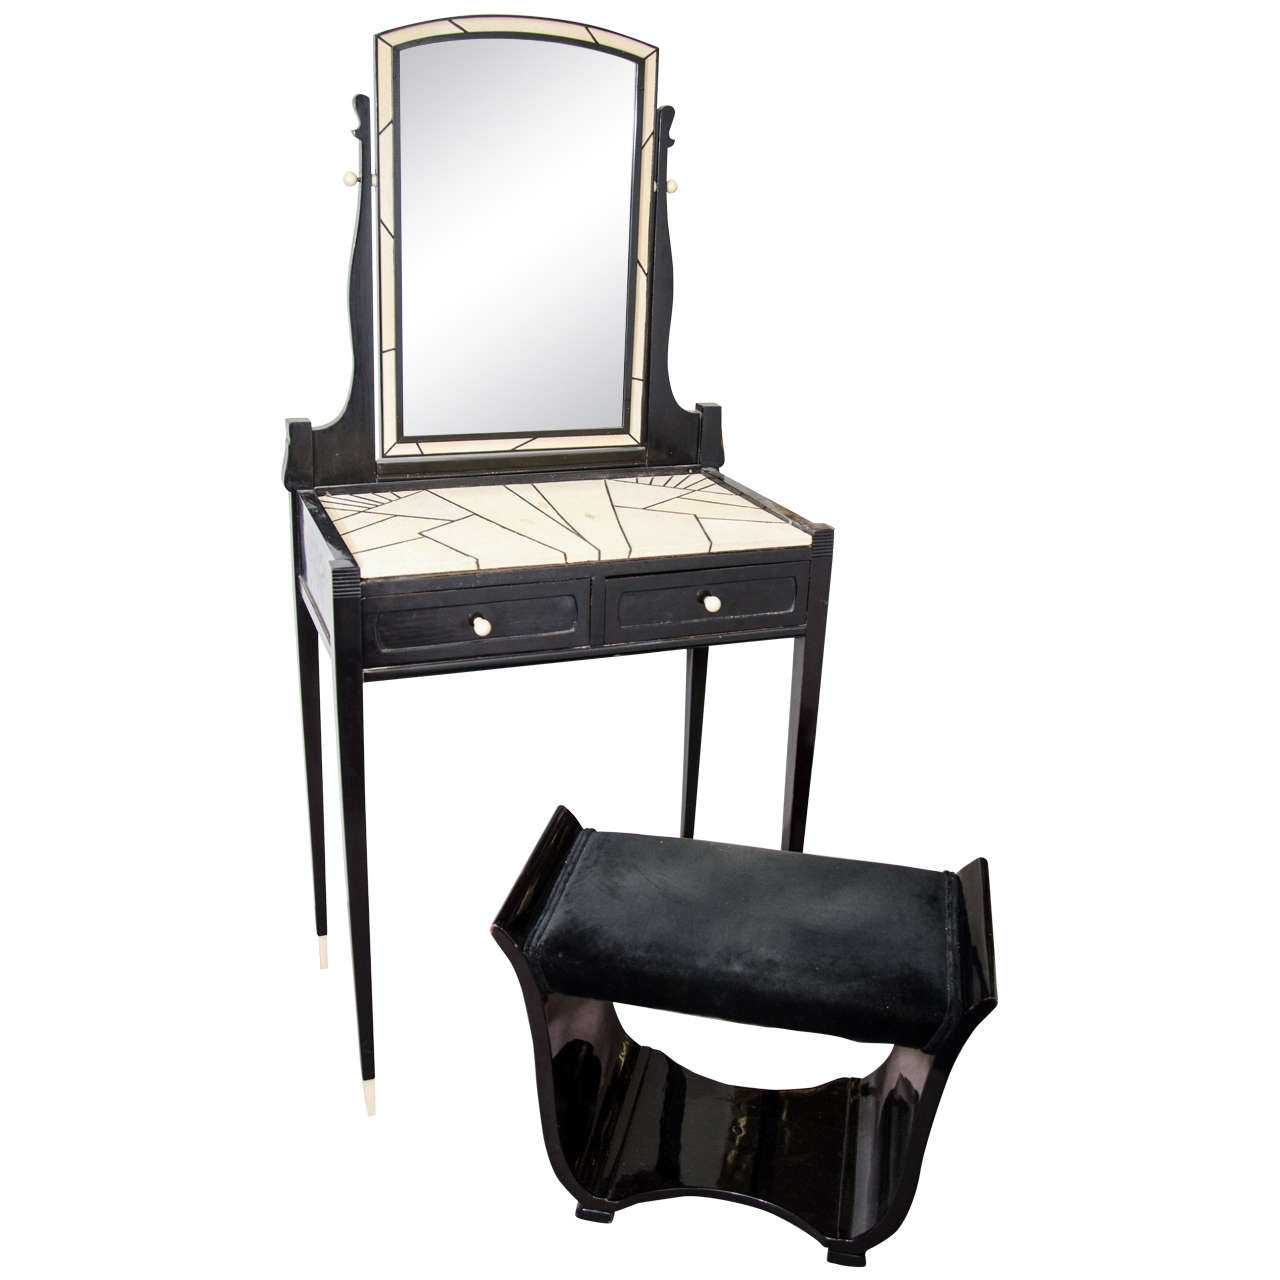  Amazing & Rare Art Deco Shagreen Maurice Dufrene Vanity with Matching Bench For Sale